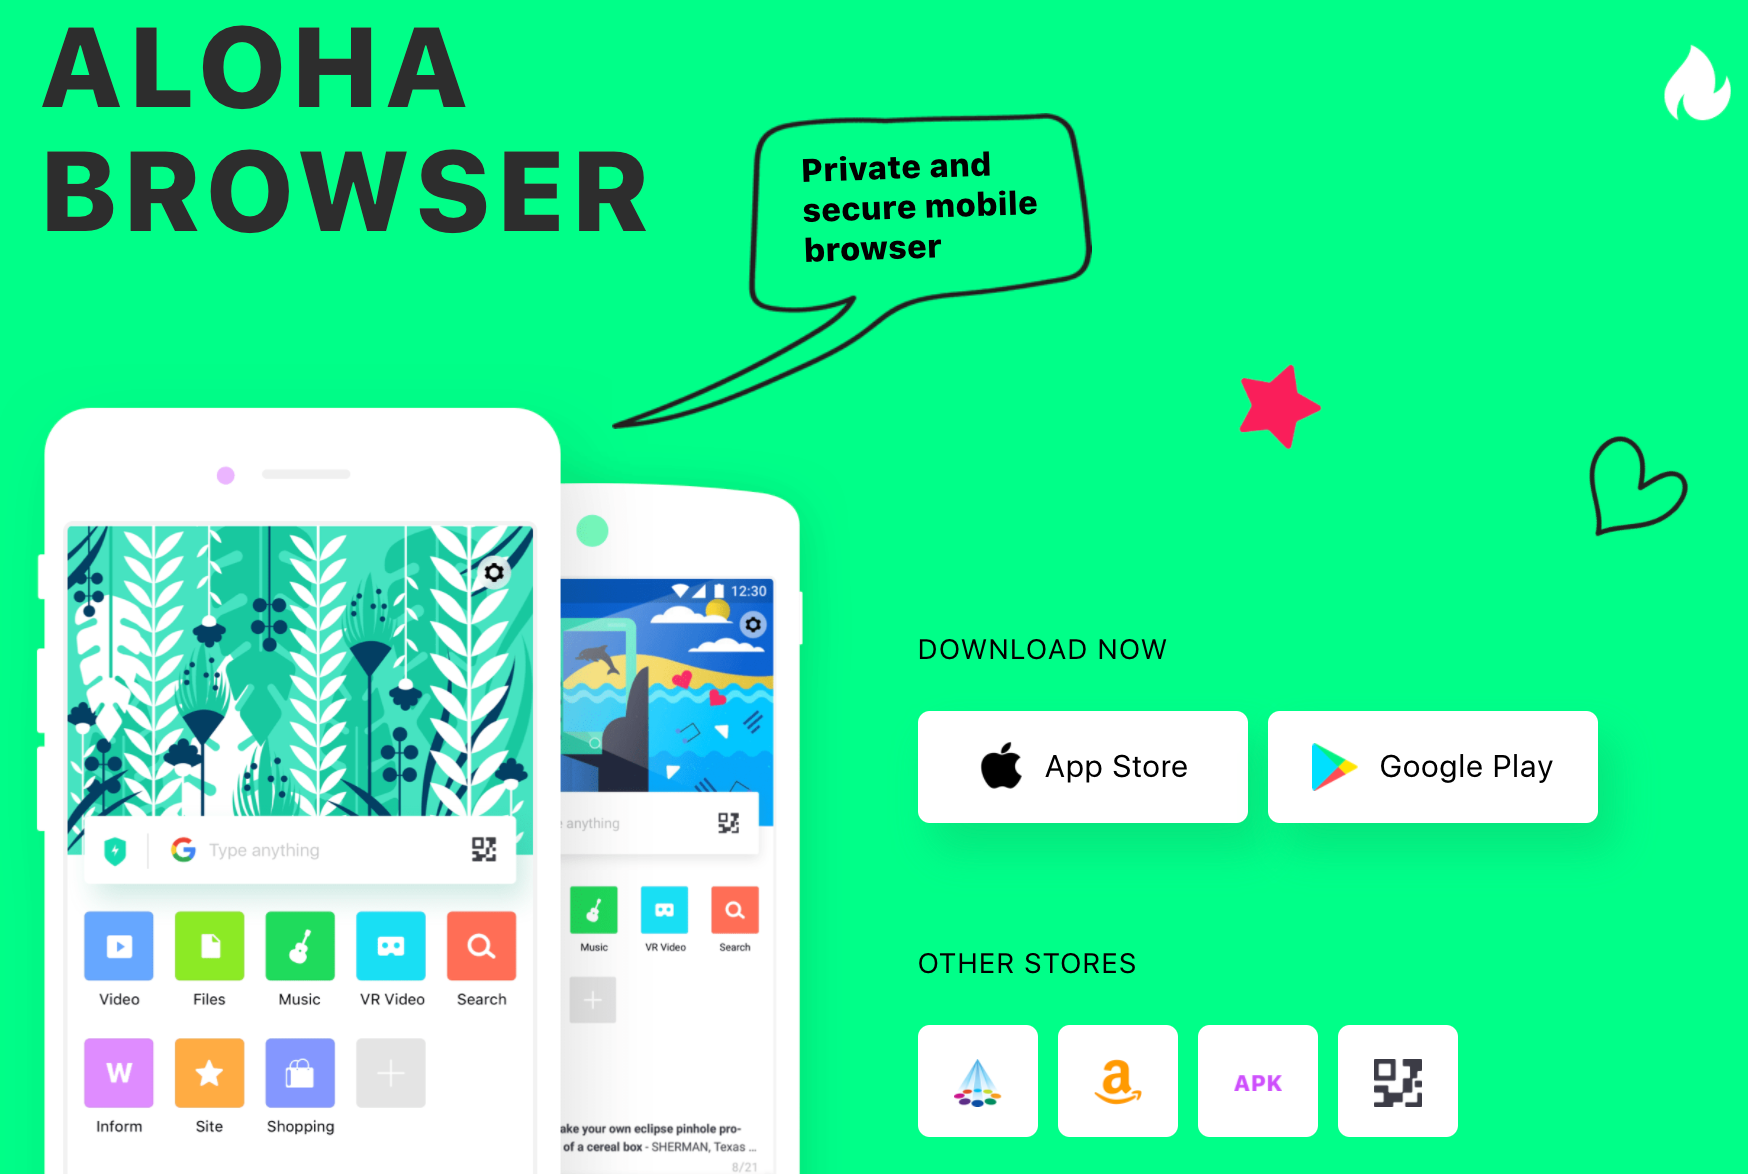 Case Study: Aloha Mobile Ltd. used Mongoose Web Server Library
 to implement private and secure way to share files across devices for “Aloha Browser".